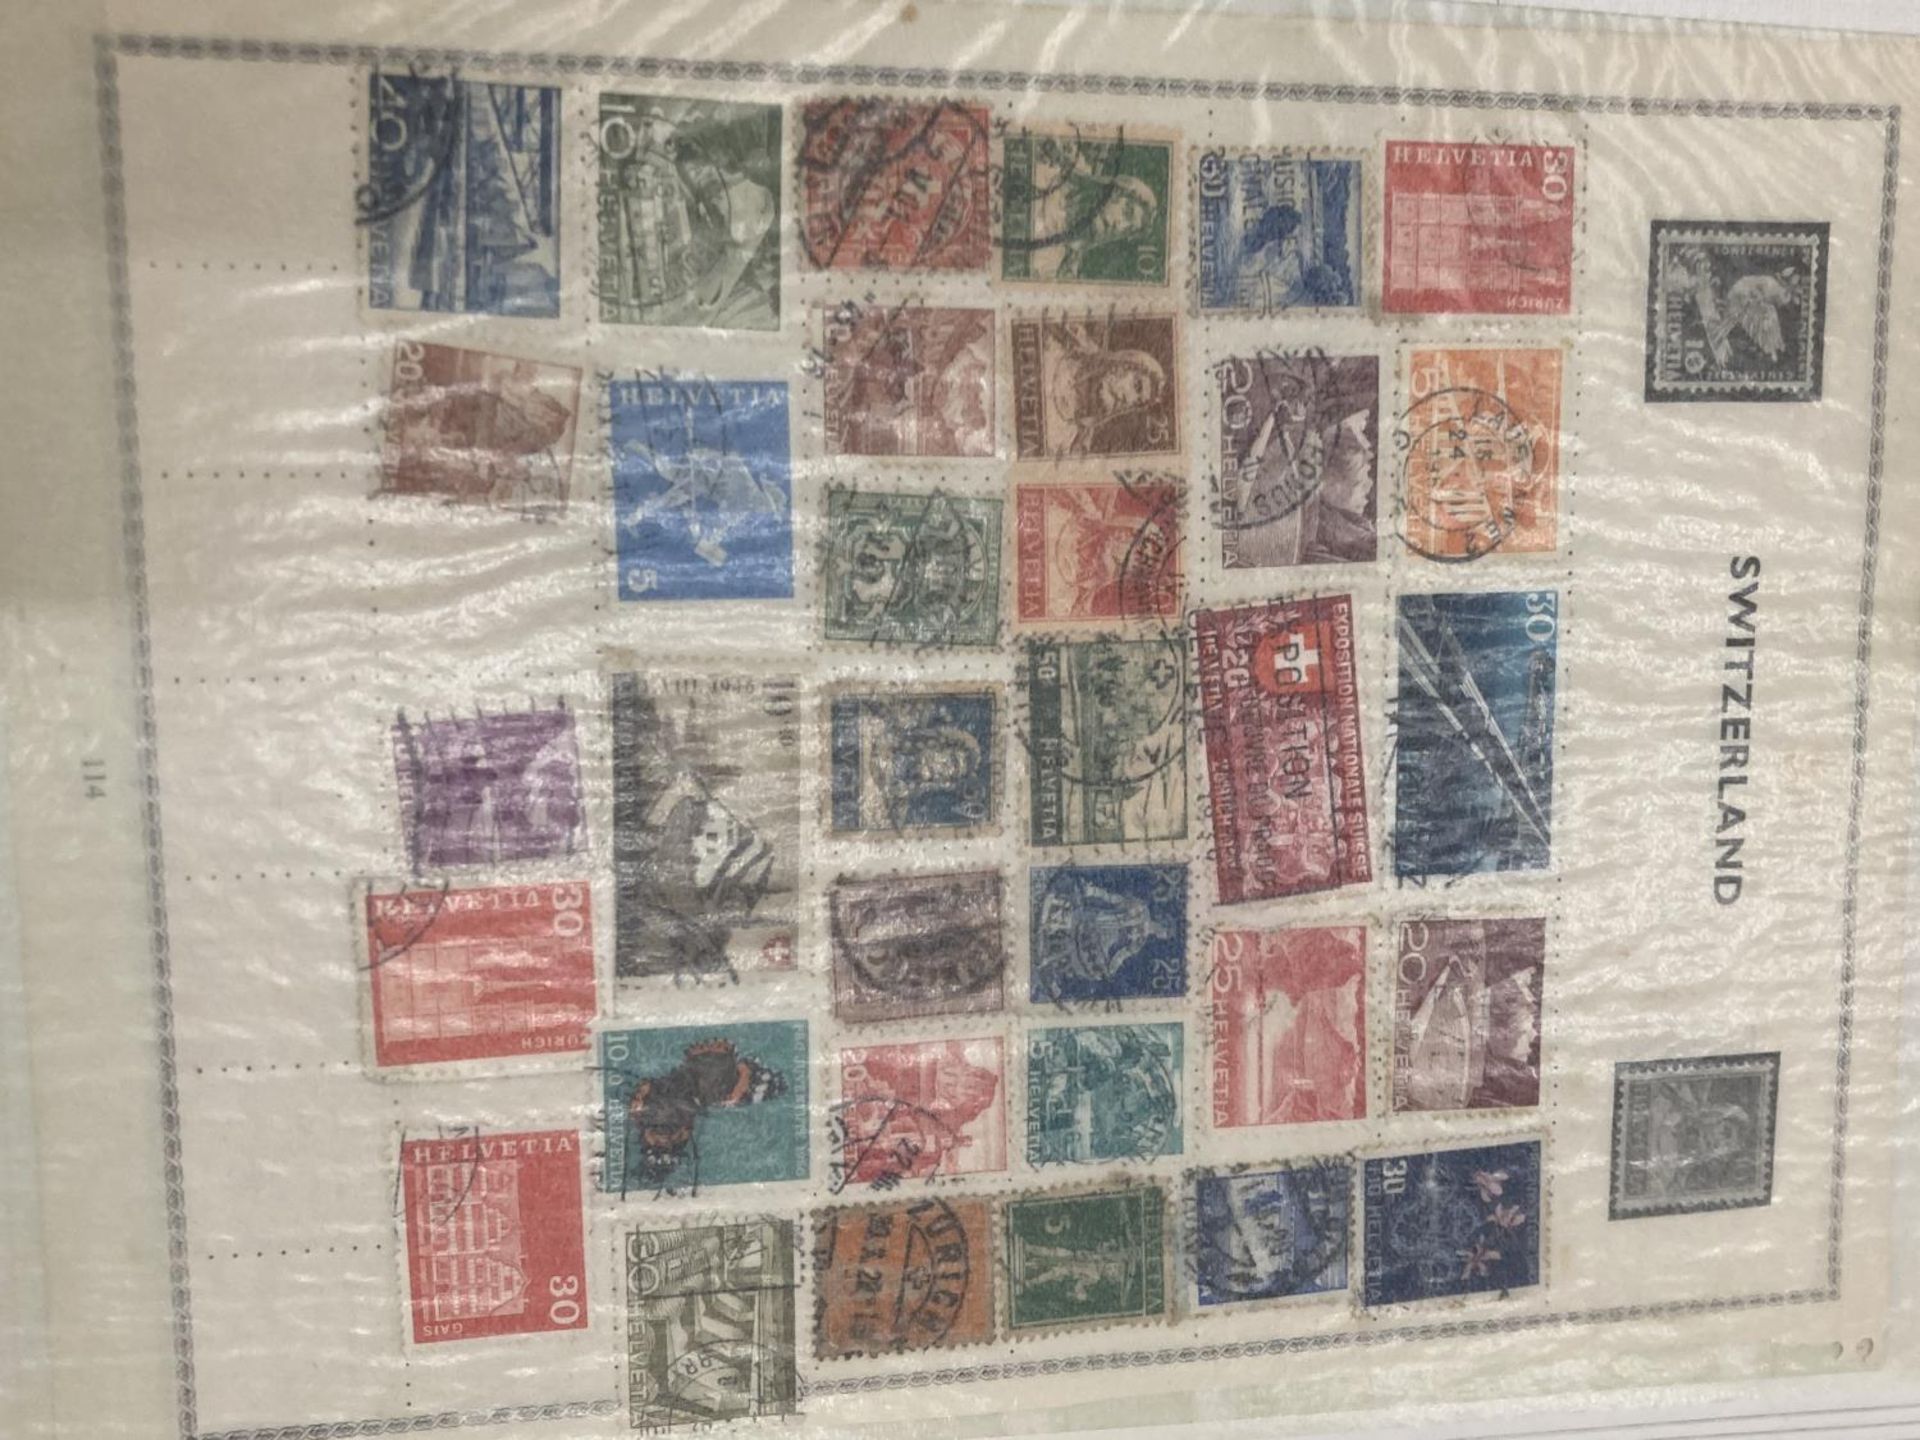 A STAMP ALBUM OF INTERNATIONAL STAMPS TO INCLUDE SWITZERLAND, SOUTH AFRICA, NORWAY, BARBADOS, - Image 3 of 6